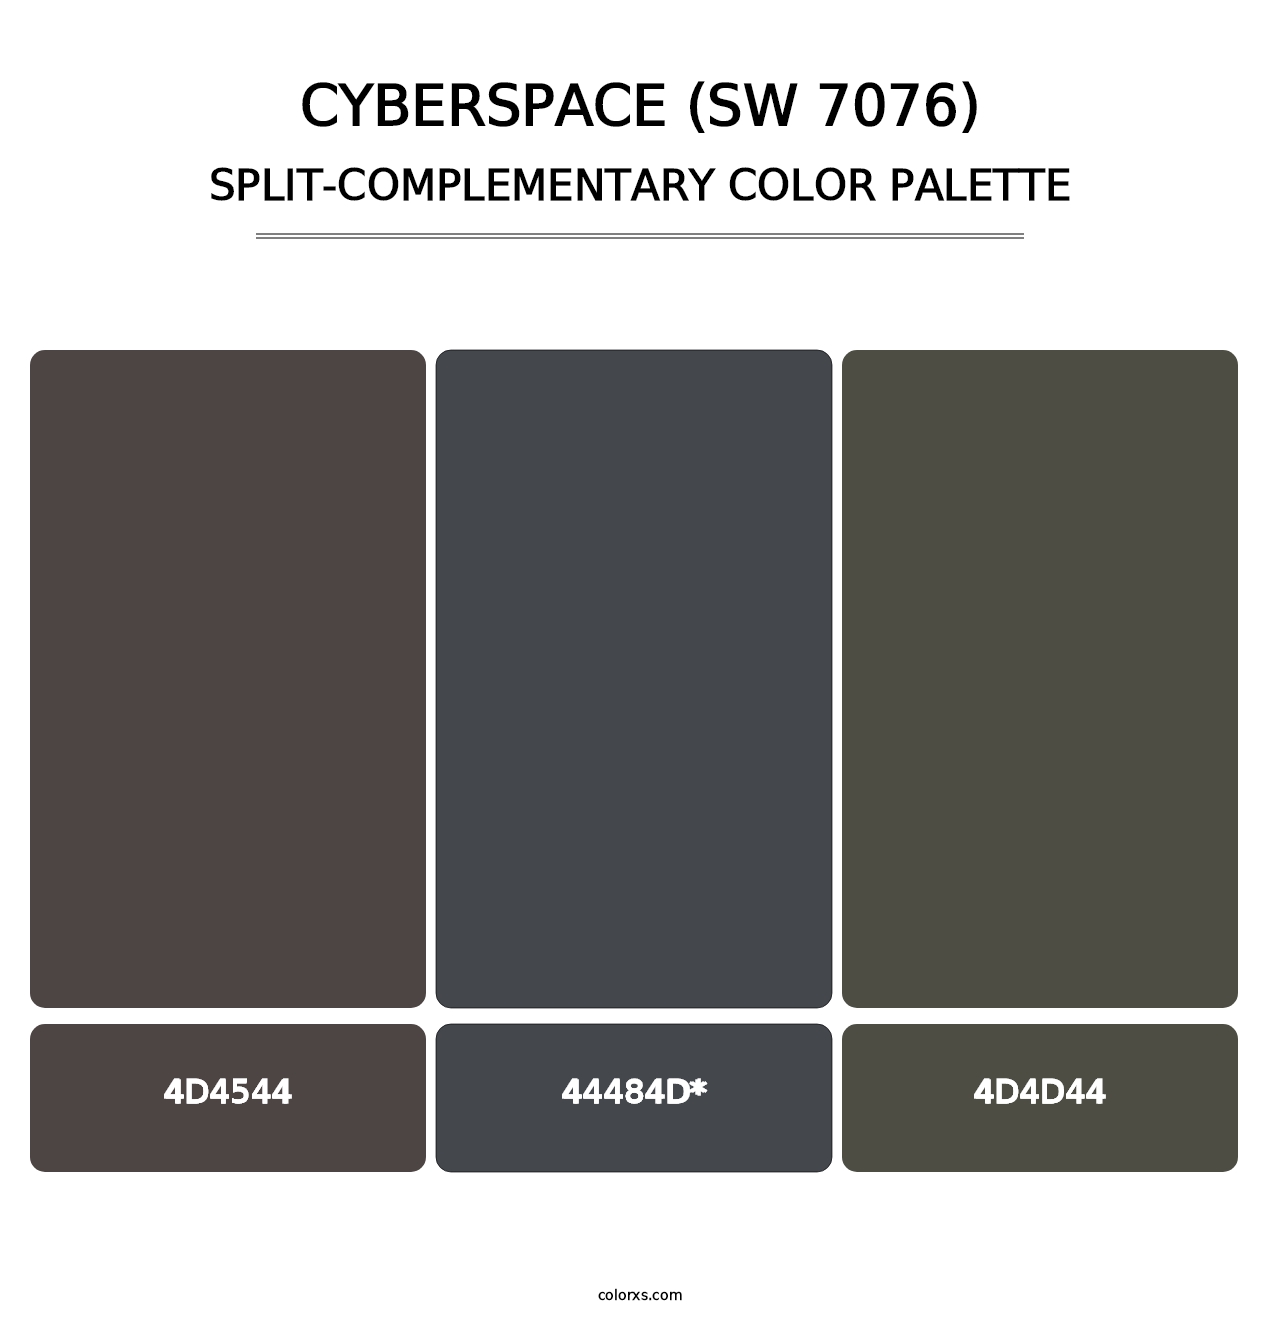 Cyberspace (SW 7076) - Split-Complementary Color Palette